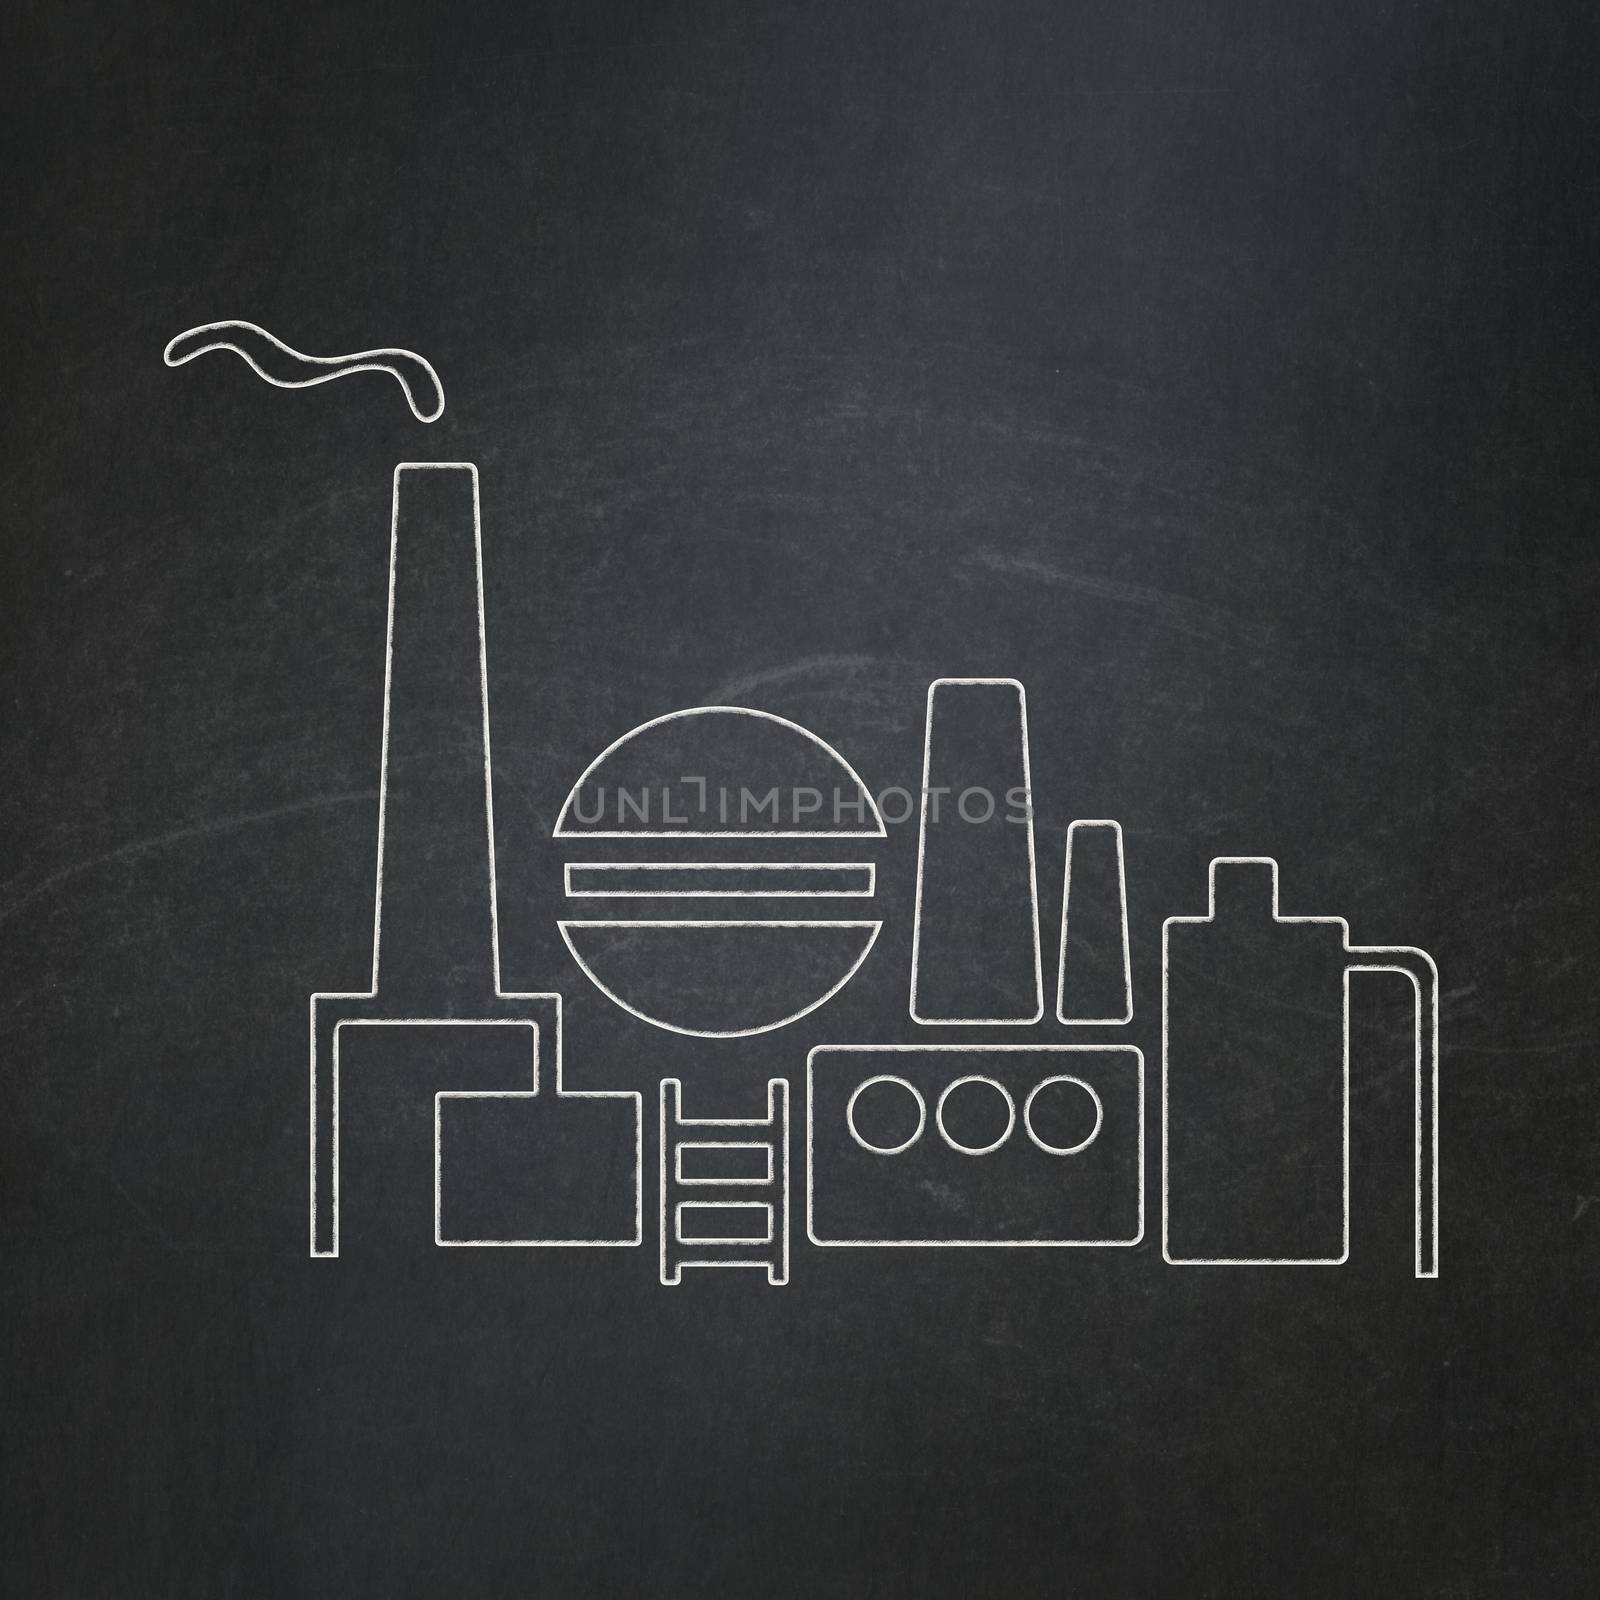 Finance concept: Oil And Gas Indusry icon on Black chalkboard background